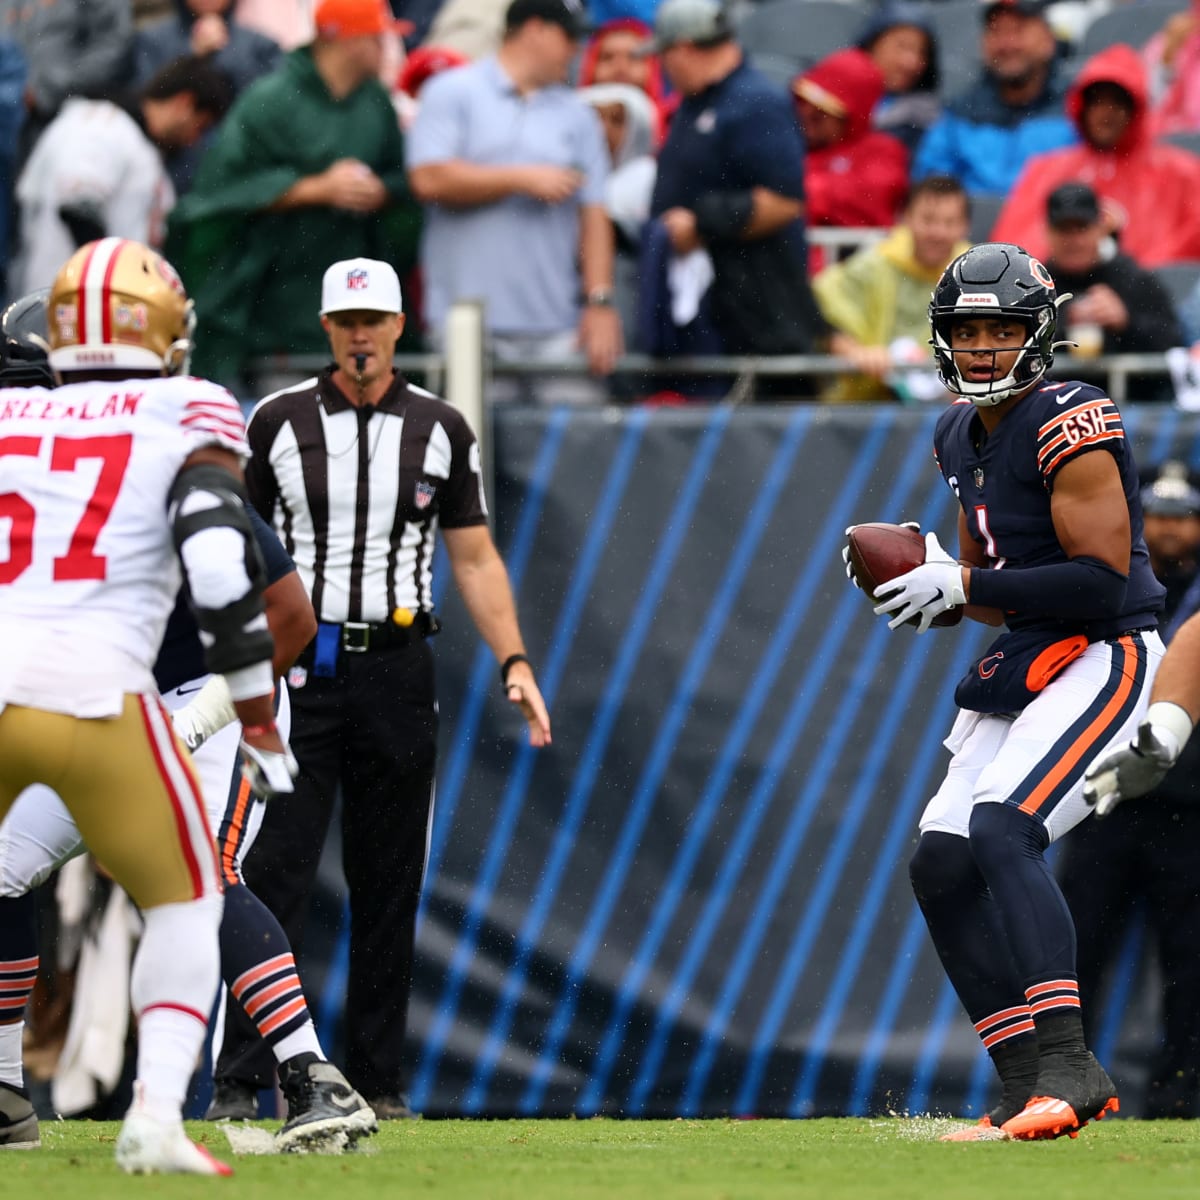 Chicago Bears rally to defeat San Francisco 49ers 19-10 in season opener